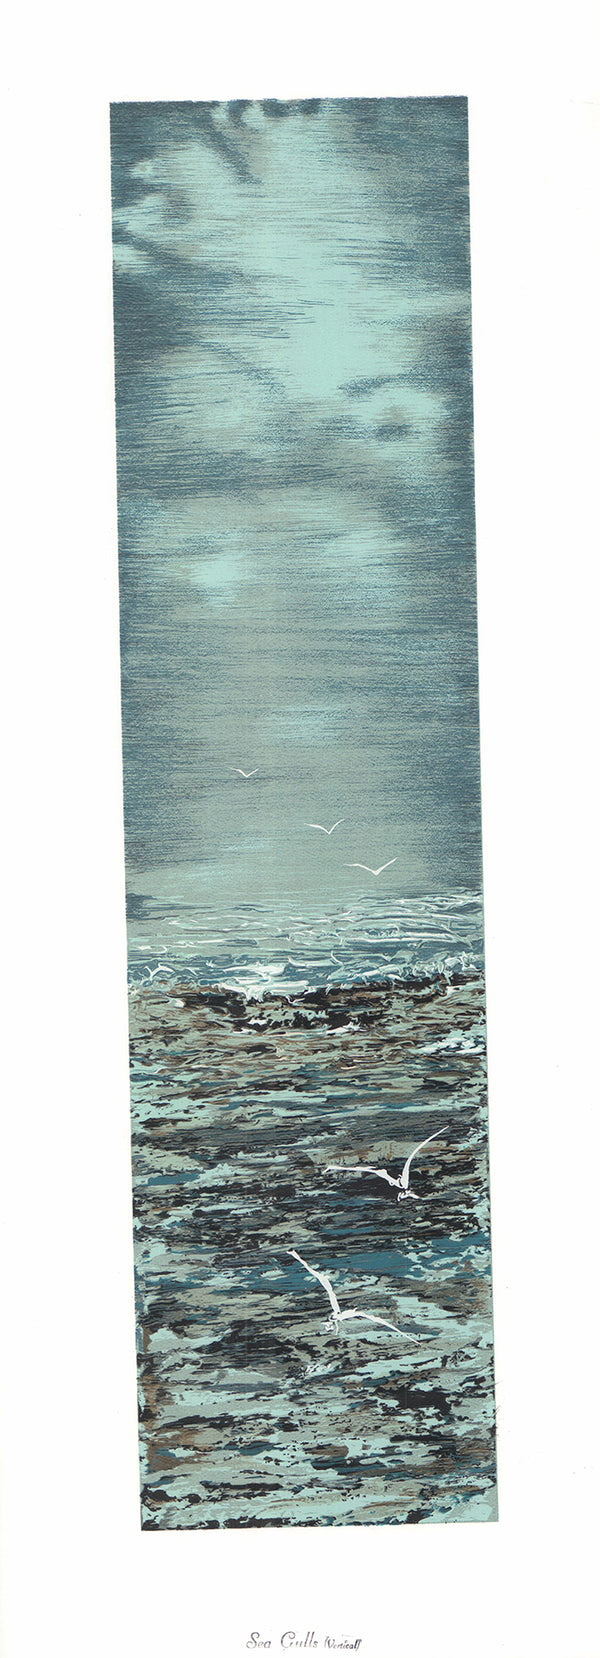 Sea Gulls by Lyman Hopkins - 10 X 26 Inches (Offset Lithograph Hand Colored)